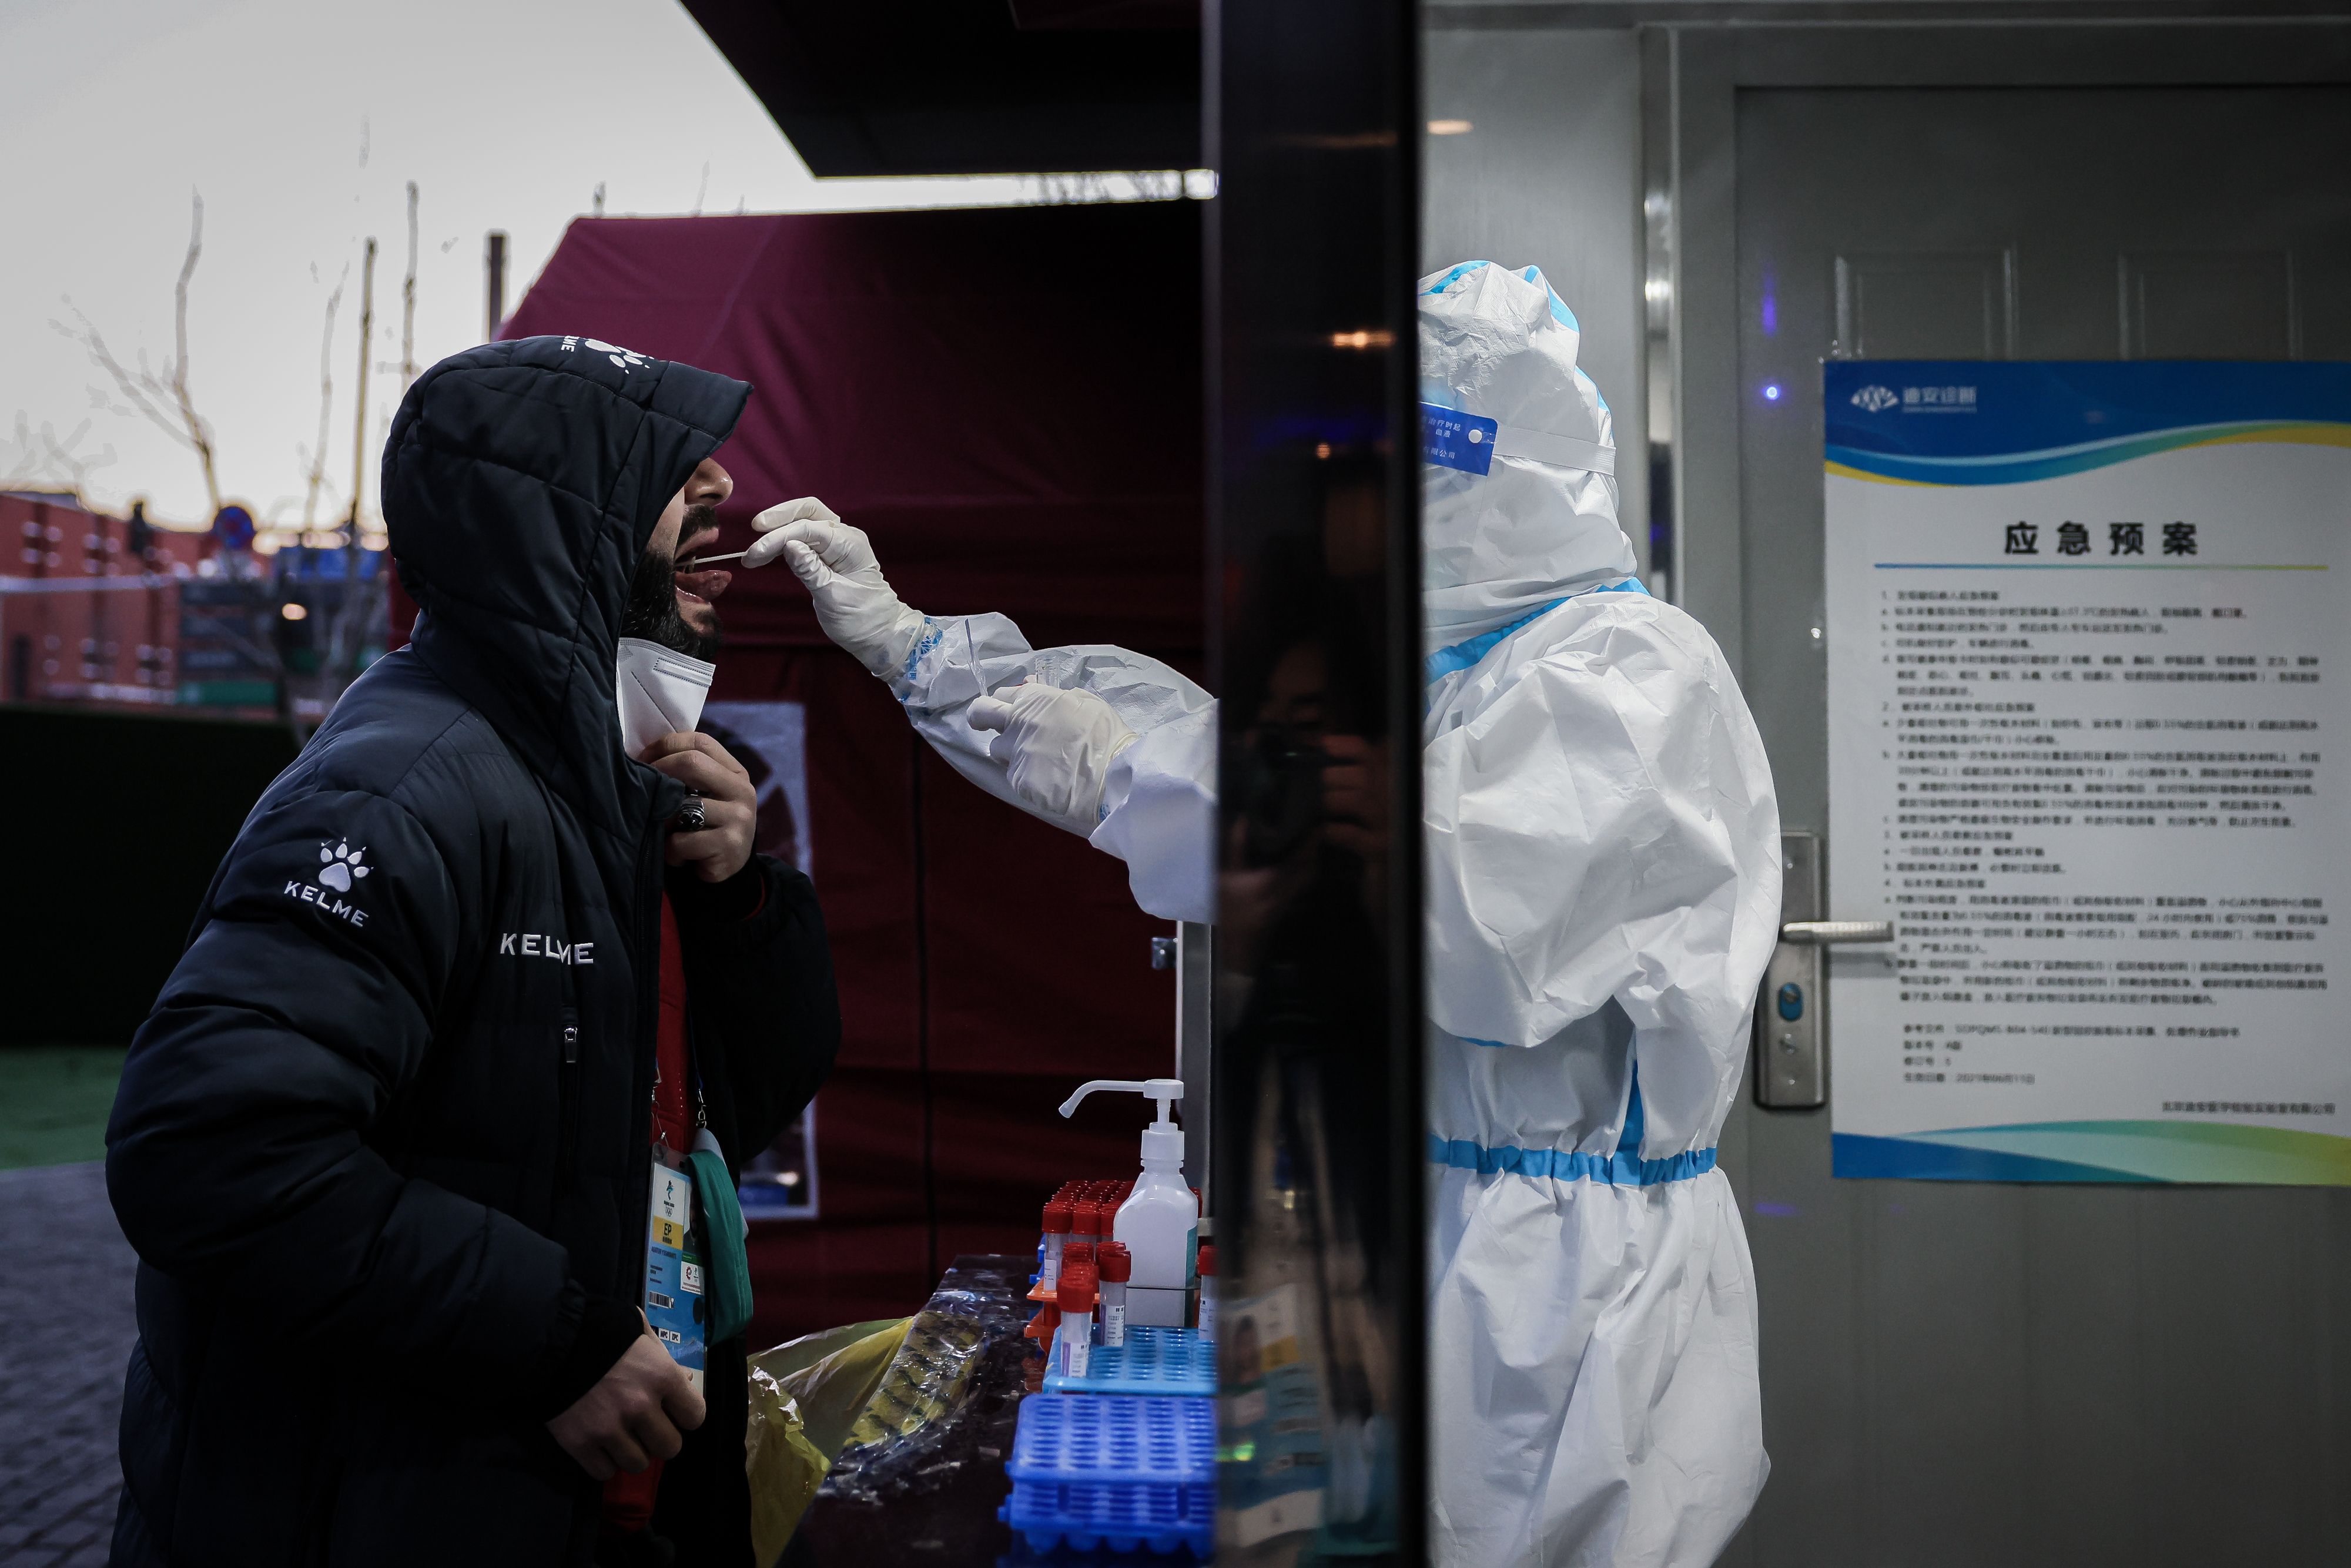 A medical staff in personal protective equipment collects a daily mandatory COVID-19 swab sample from member of the media on February 04, 2022 in Beijing, China.